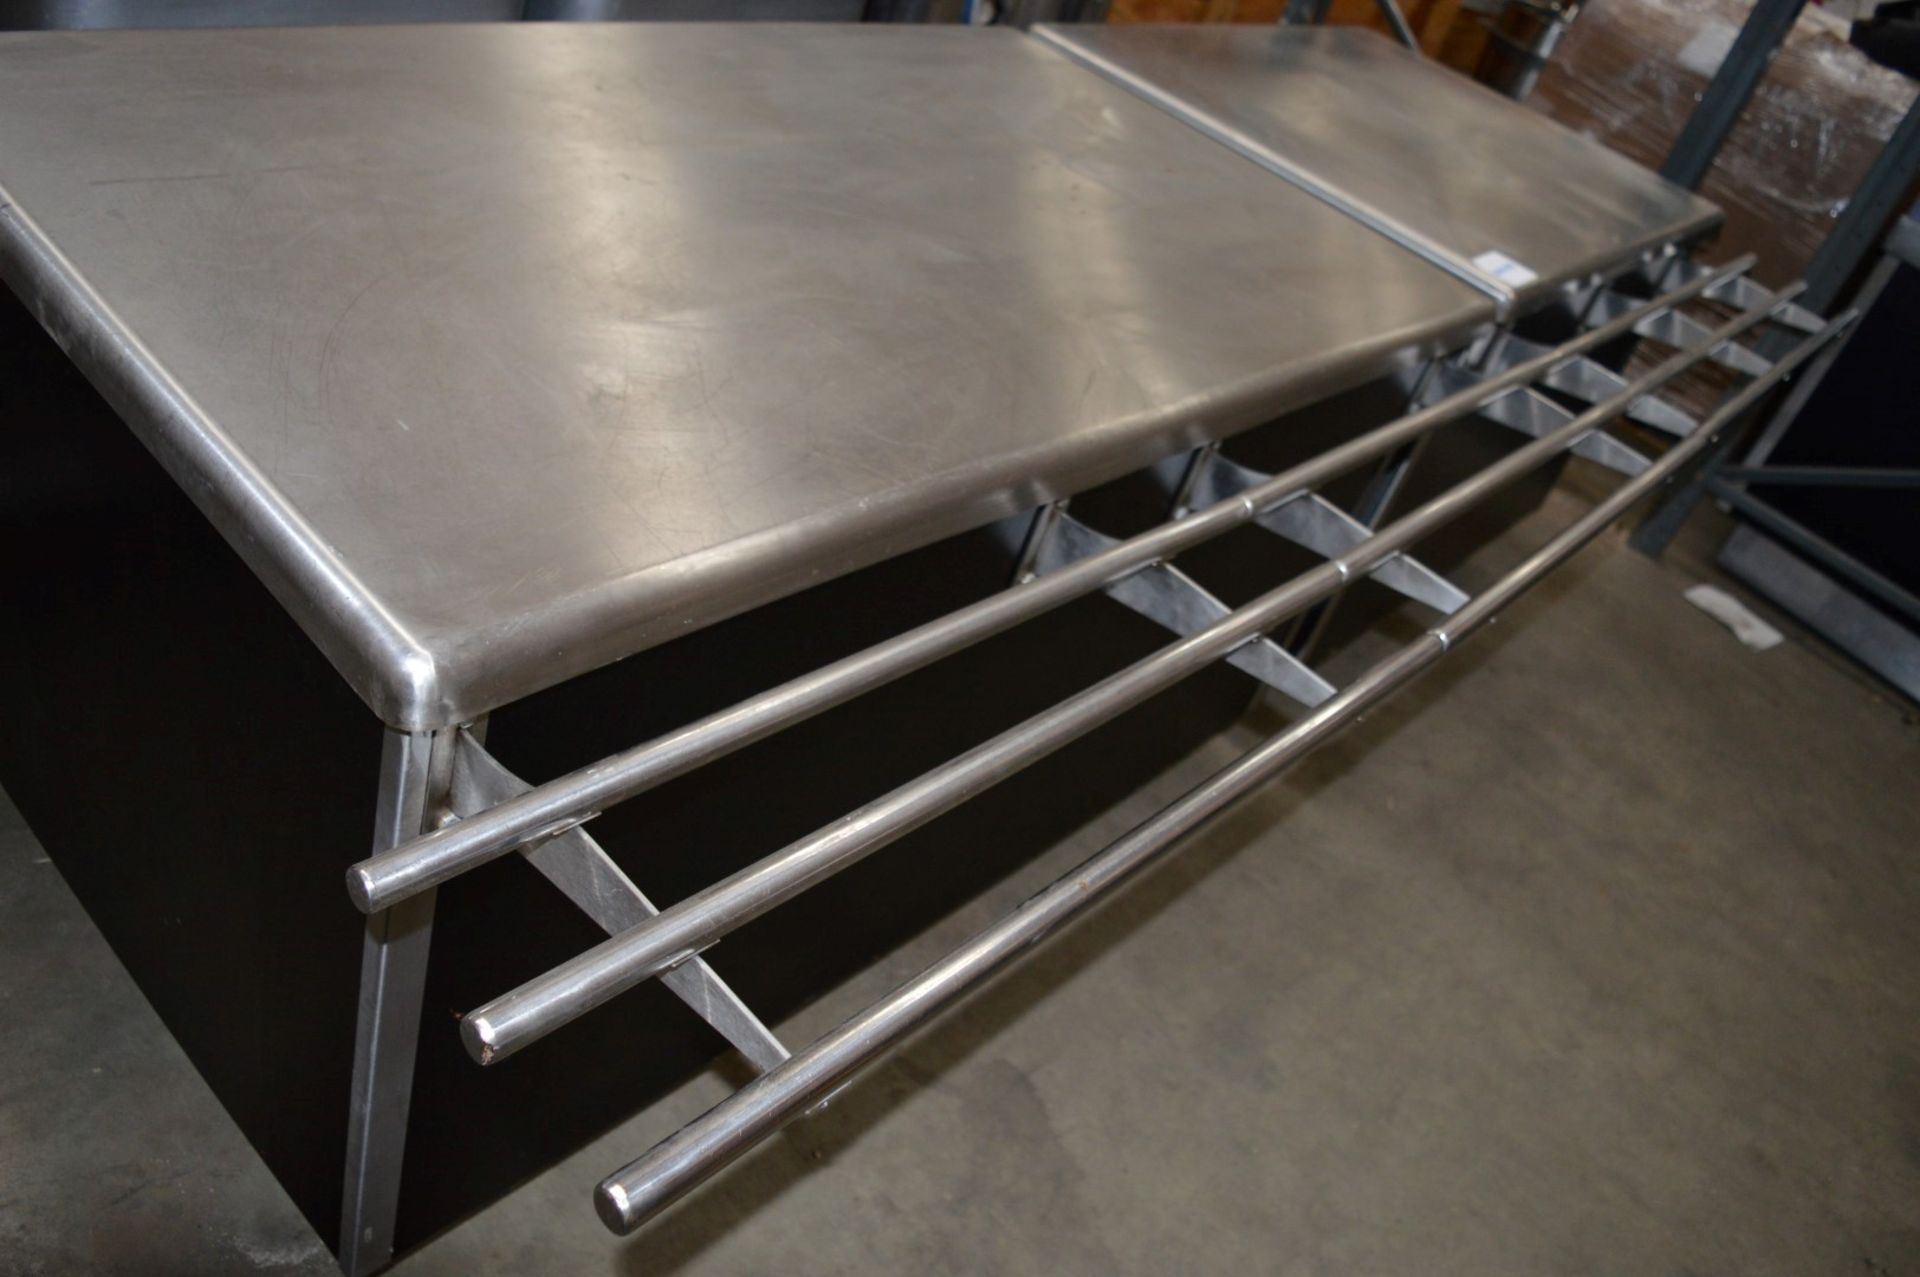 2 x Serving Counters - On Castors For Maneuverability - Ideal For Pub Carvery, Canteens, All You Can - Image 5 of 7